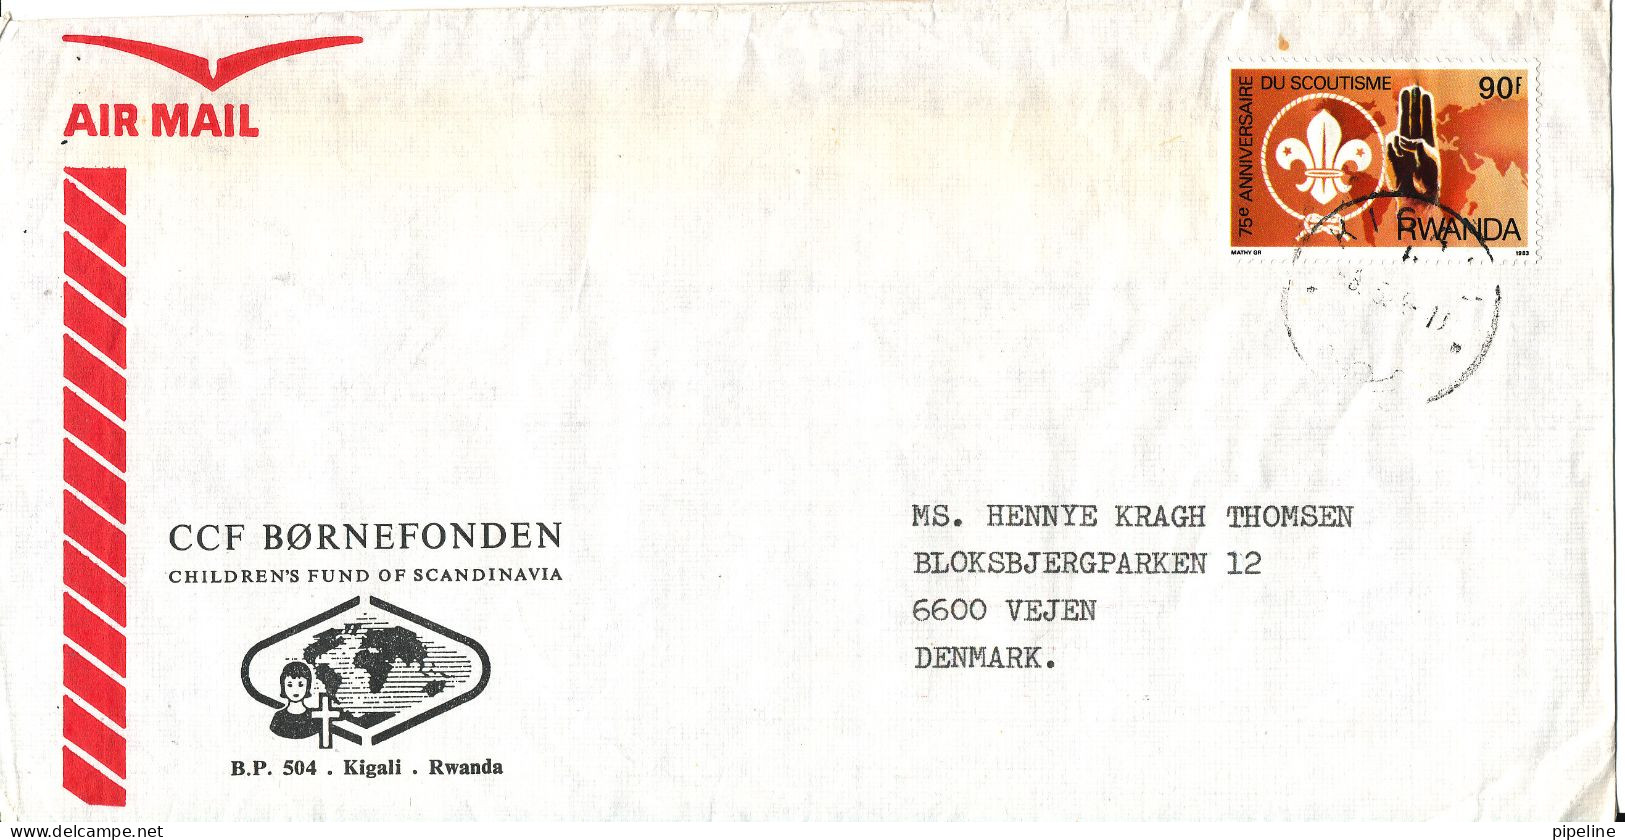 Rwanda Air Mail Cover Sent To Denmark With A SCOUT SCOUTING Stamp The Stamp Is Missing A Corner - Storia Postale